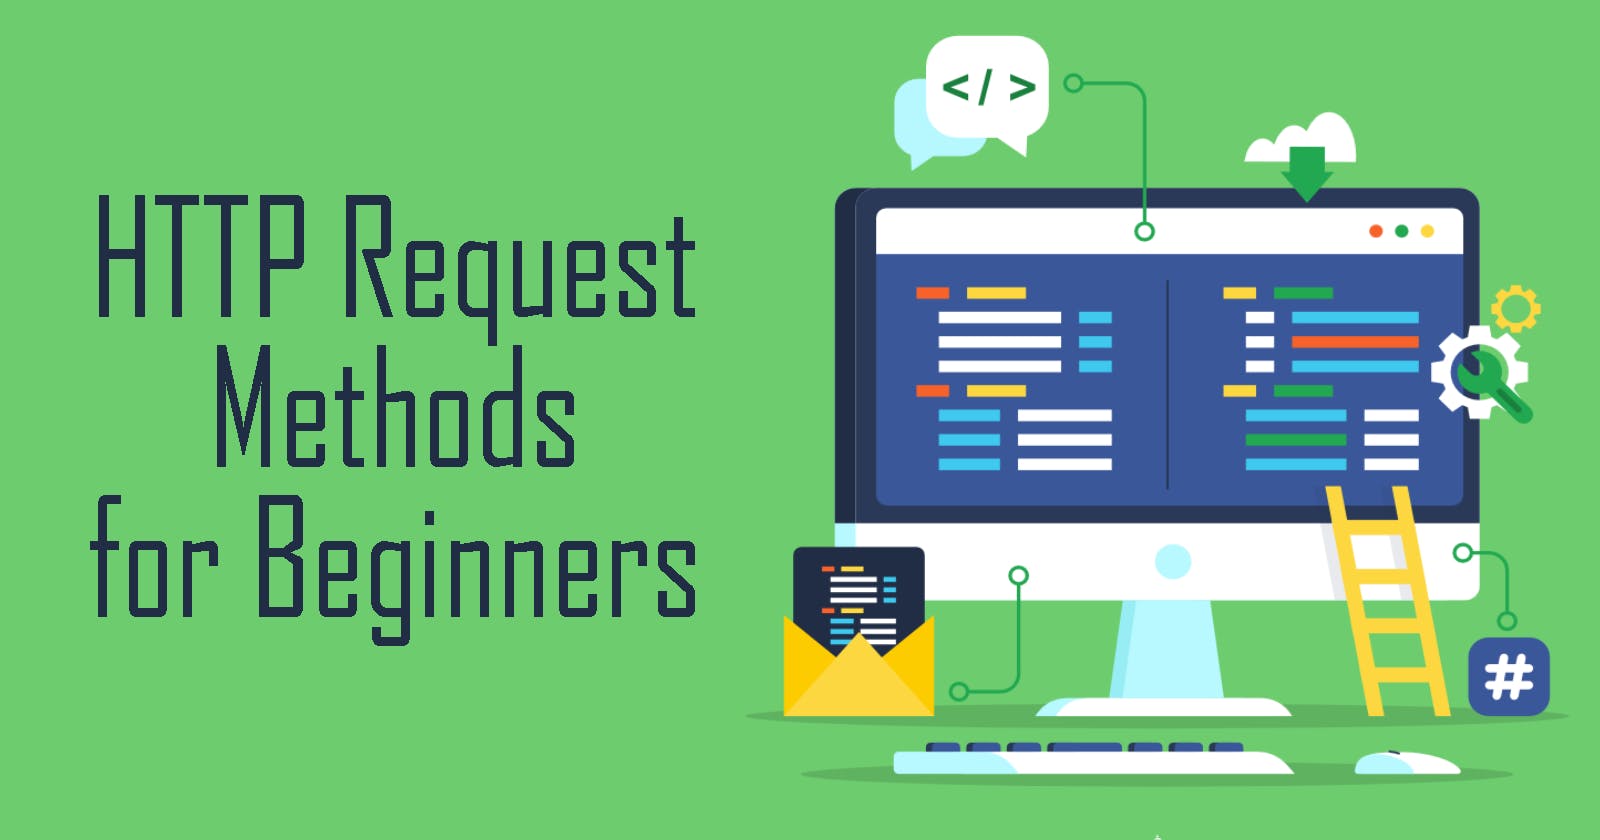 The Basics of HTTP Request Methods